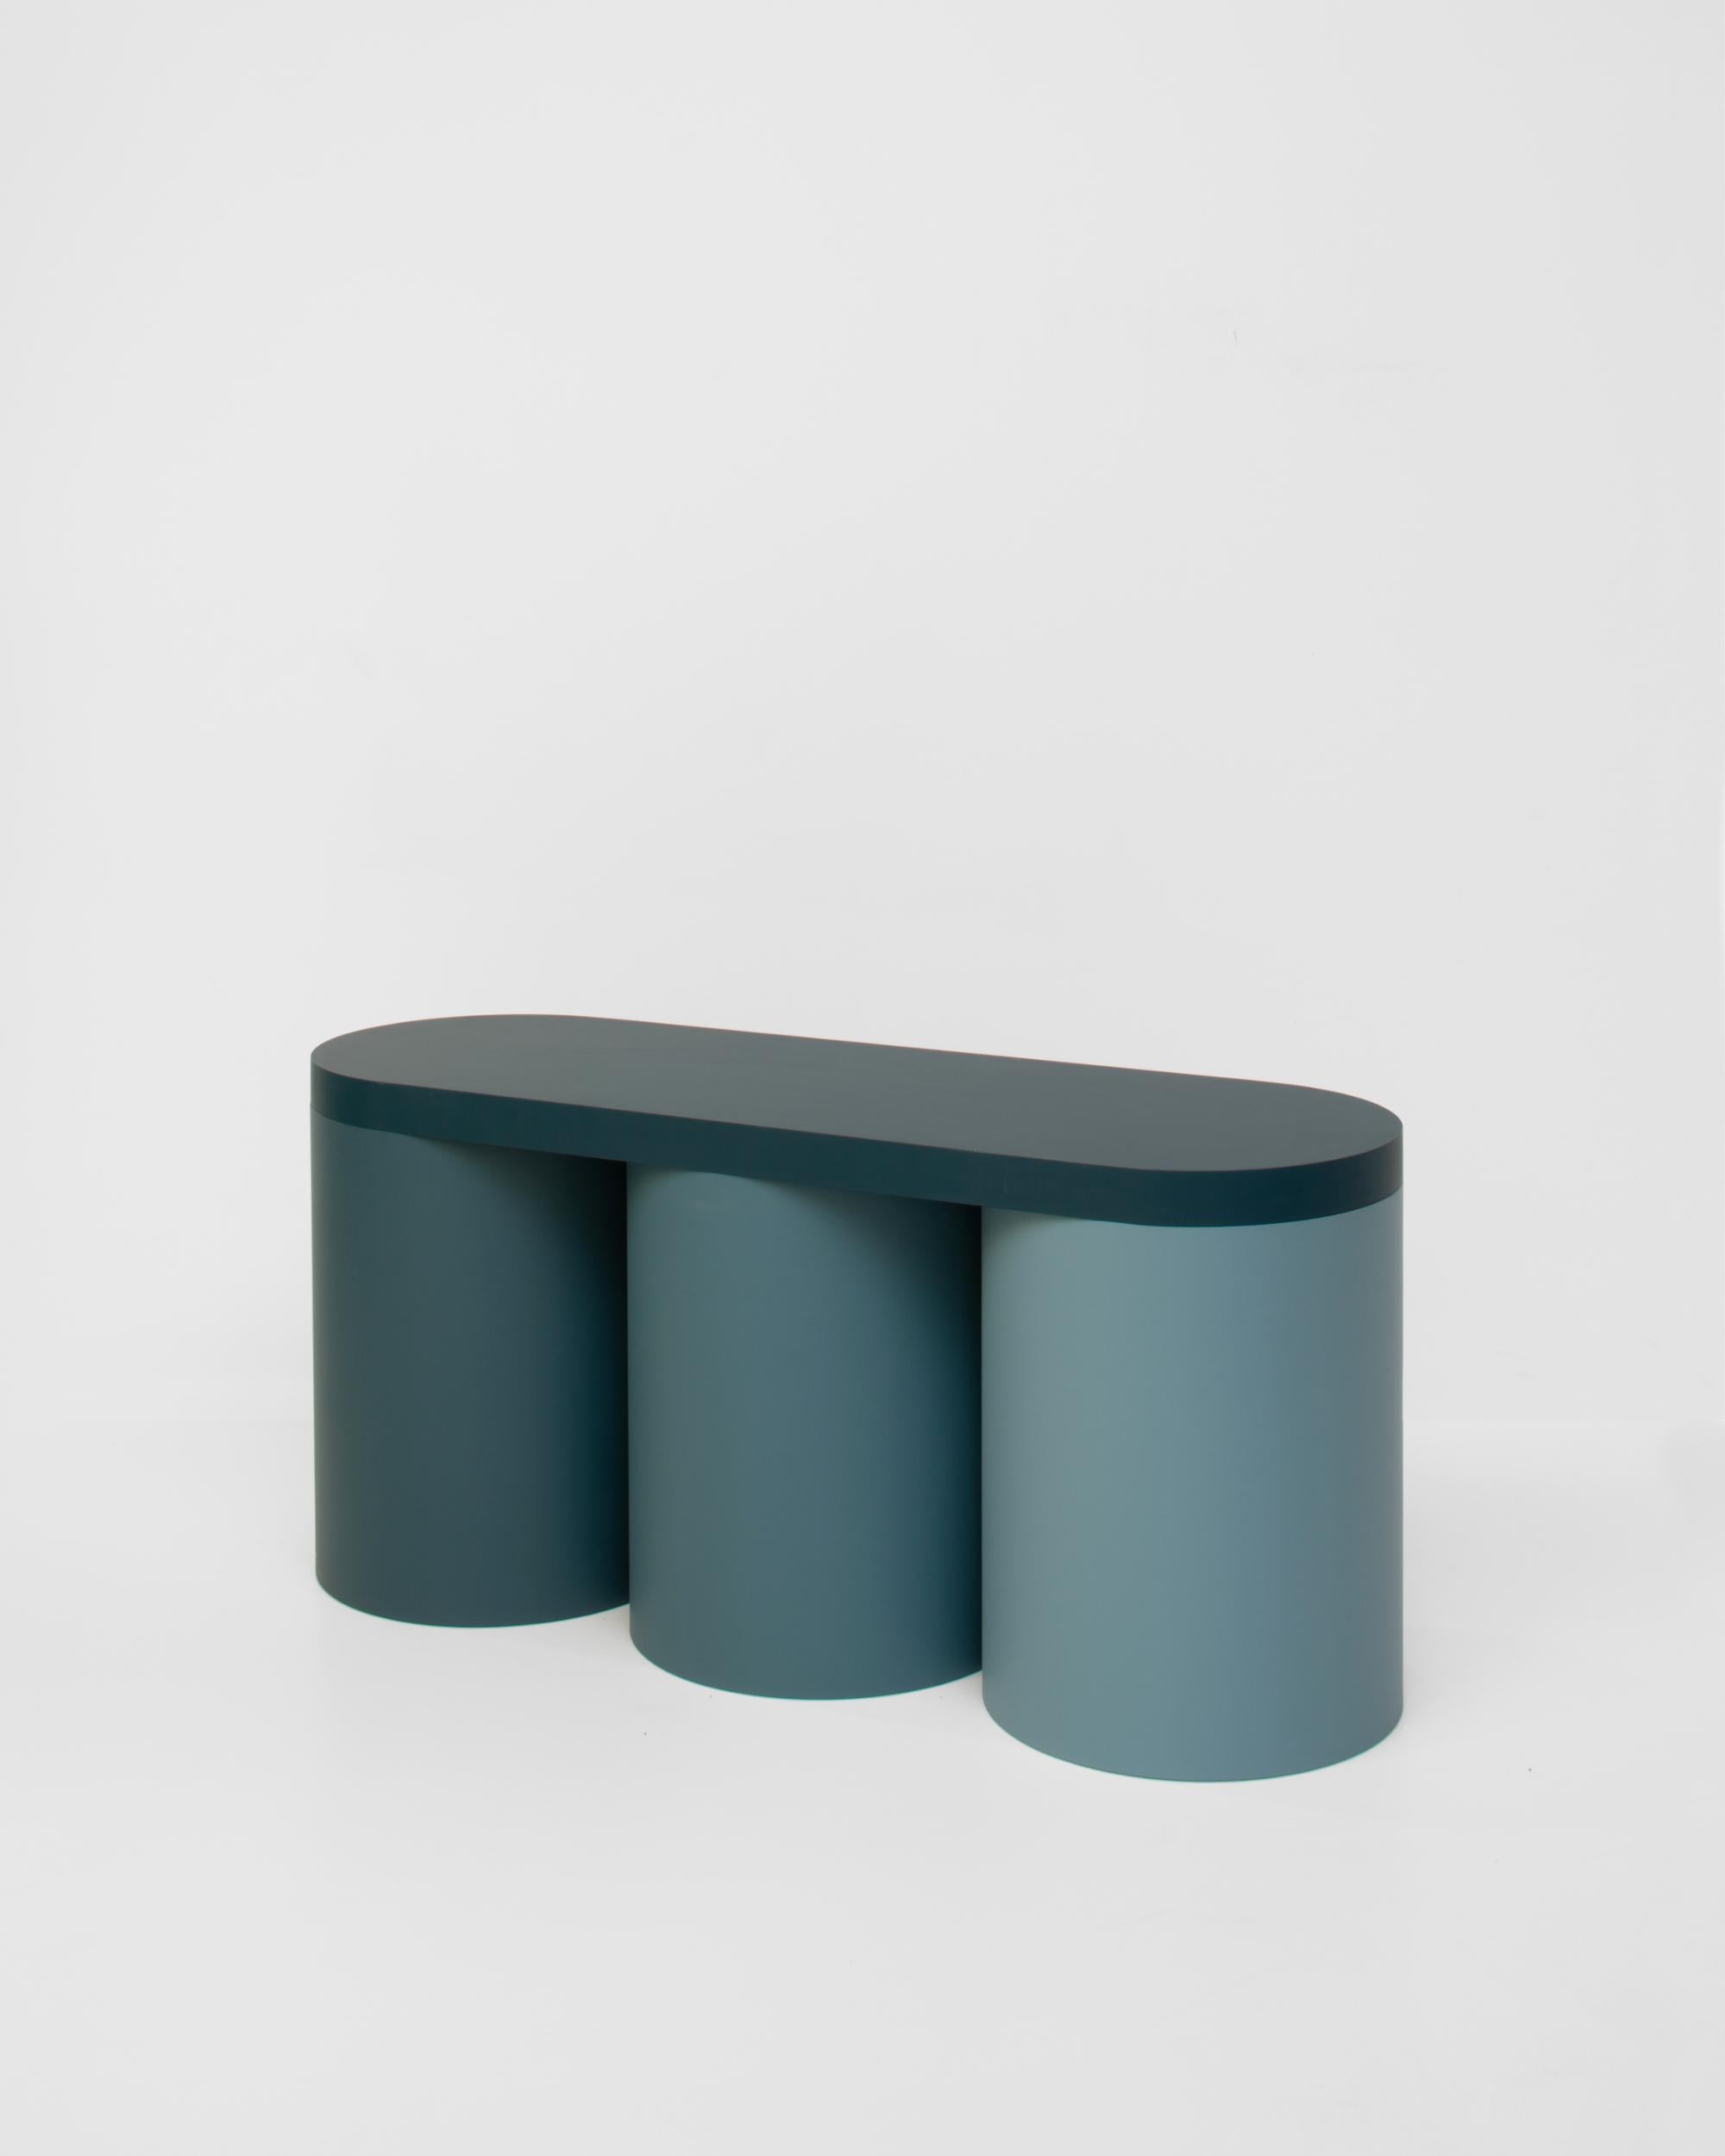 Colorful stool with a contemporary design. 

Carefully handmade in our atelier. Manufactured in an artisanal way, in which every step of the process is carefully executed

The base of this stool consists of 1 hollow cylinder. It's topped with a